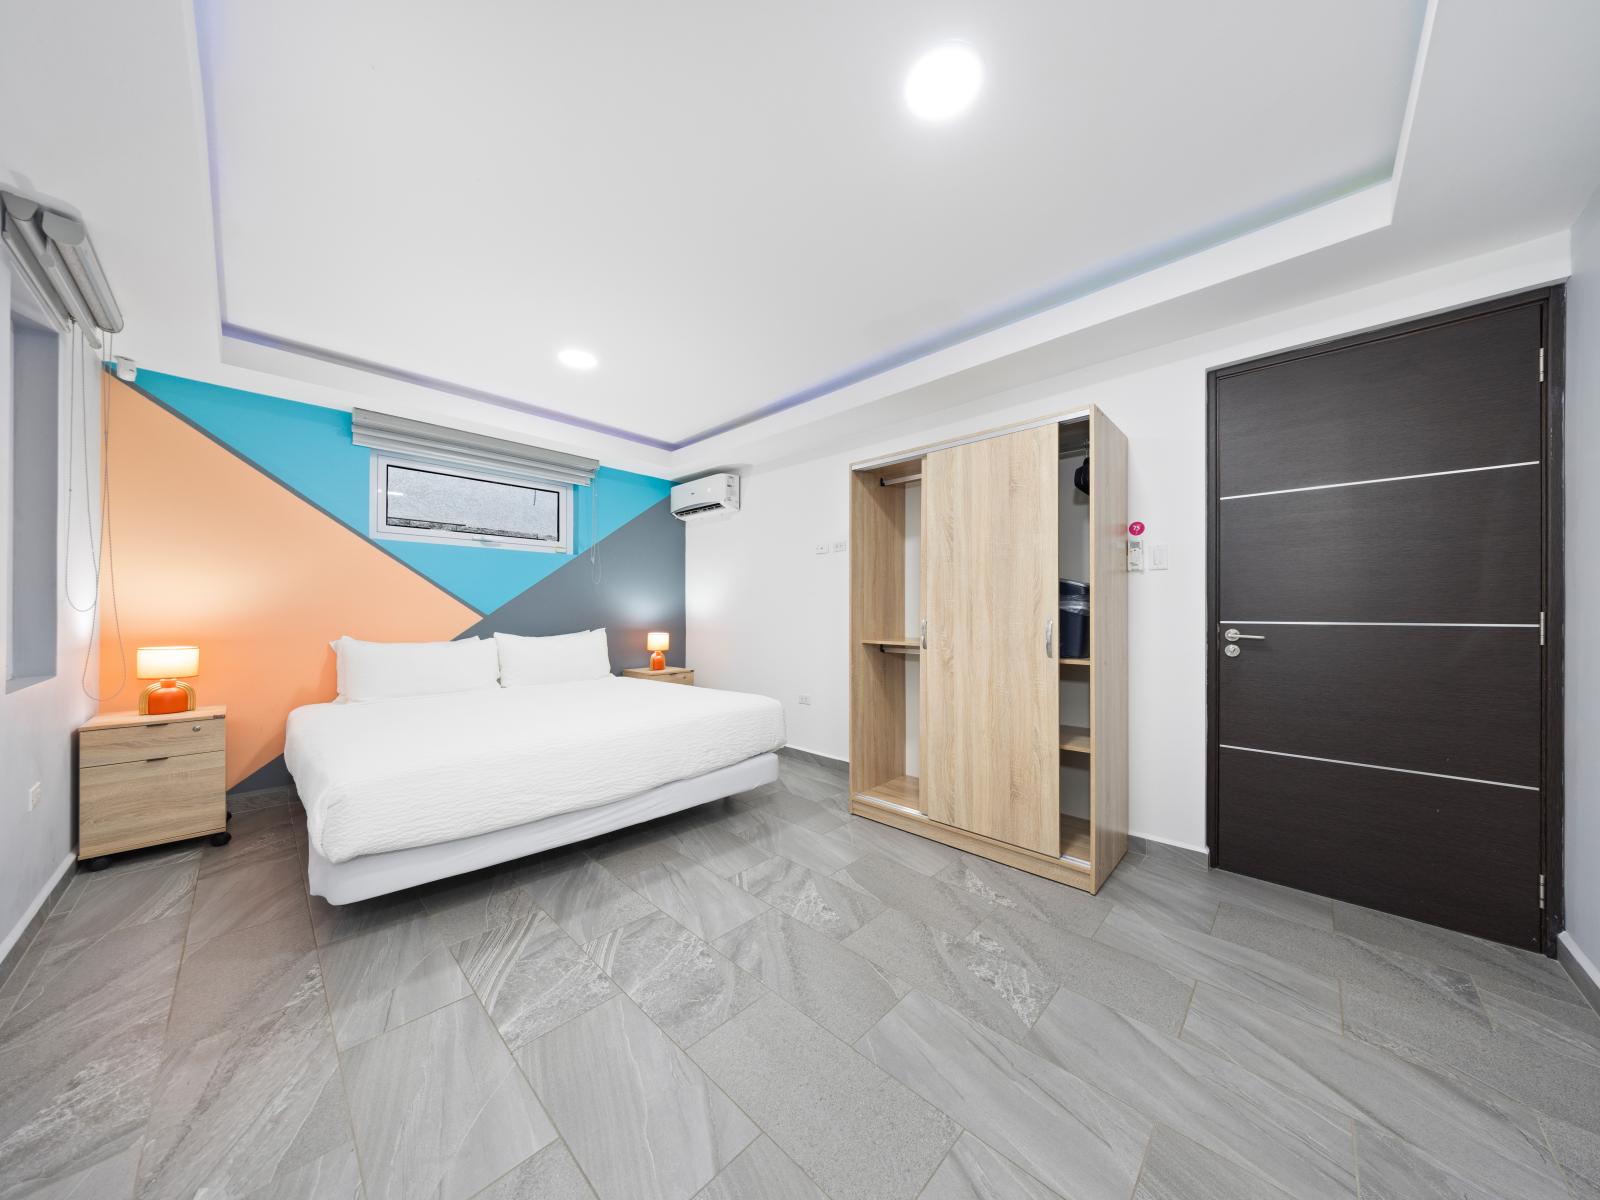 Enter into luxury with this meticulously designed bedroom of the home in Aruba - Offering a king size bed, large closet with sliding doors and smart TV, a haven of comfort and style - Modern and stylish decor that complements the space